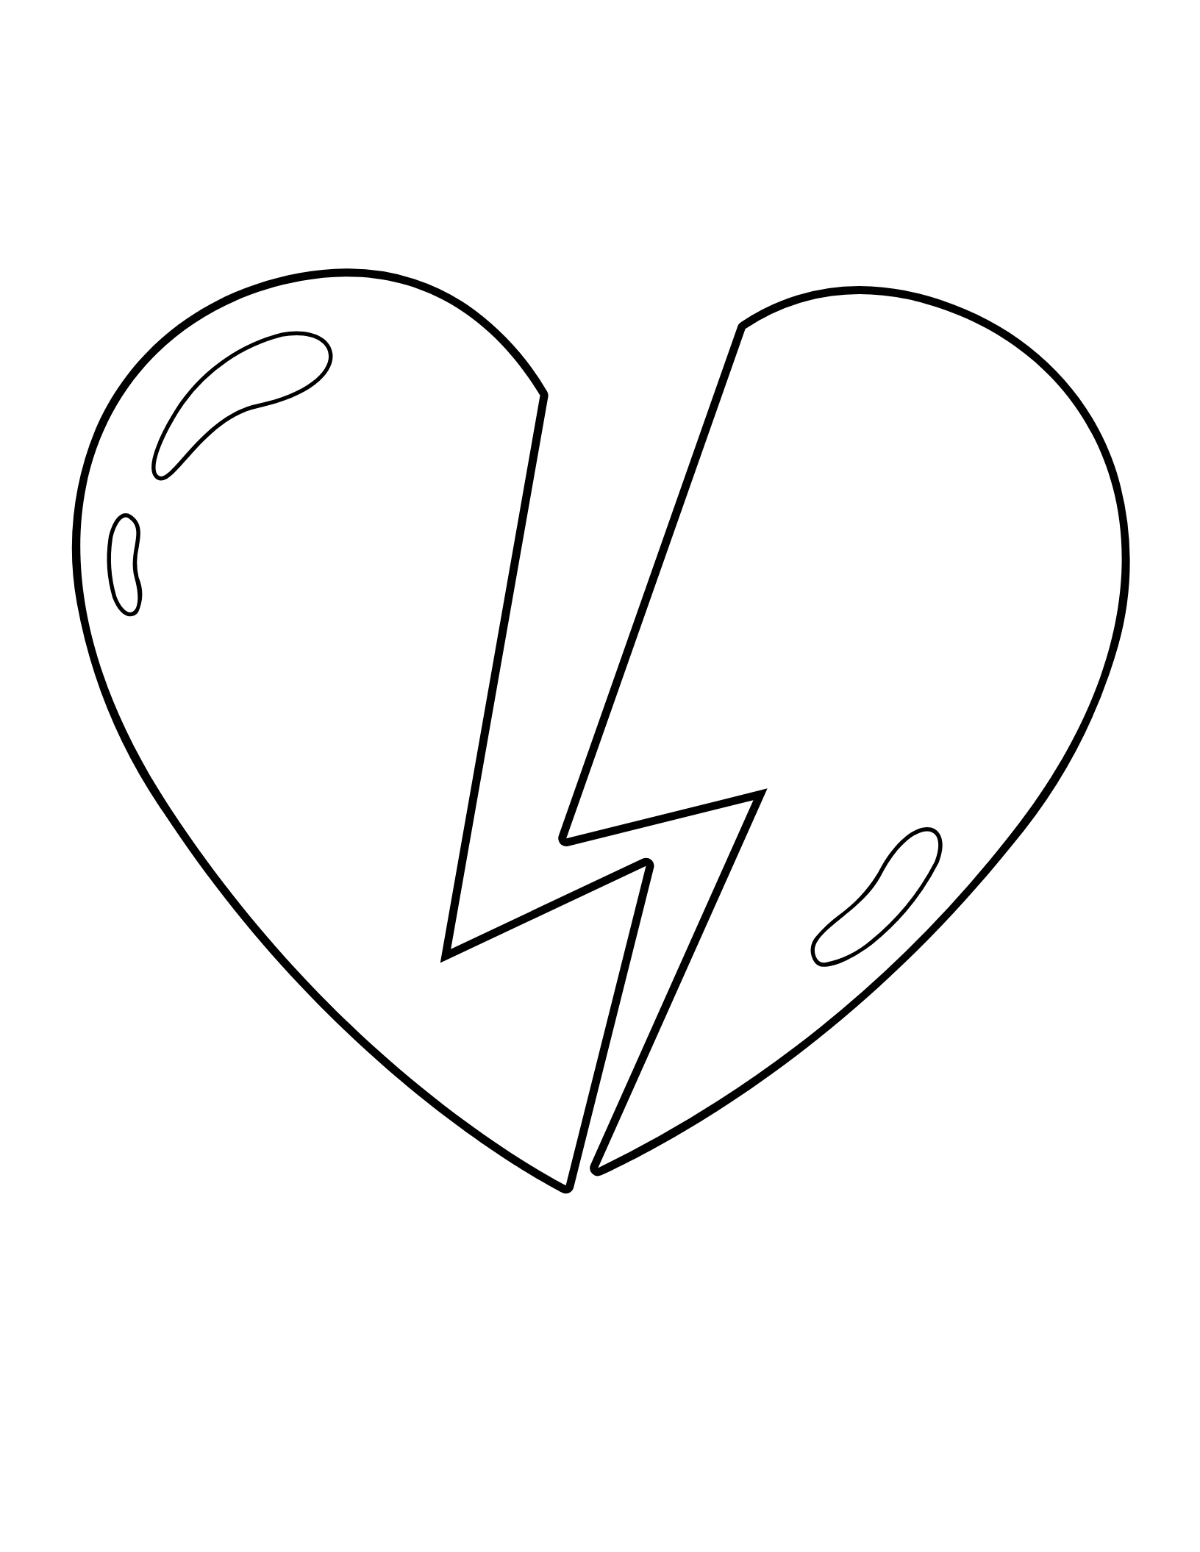 White Broken Heart Coloring Page Template